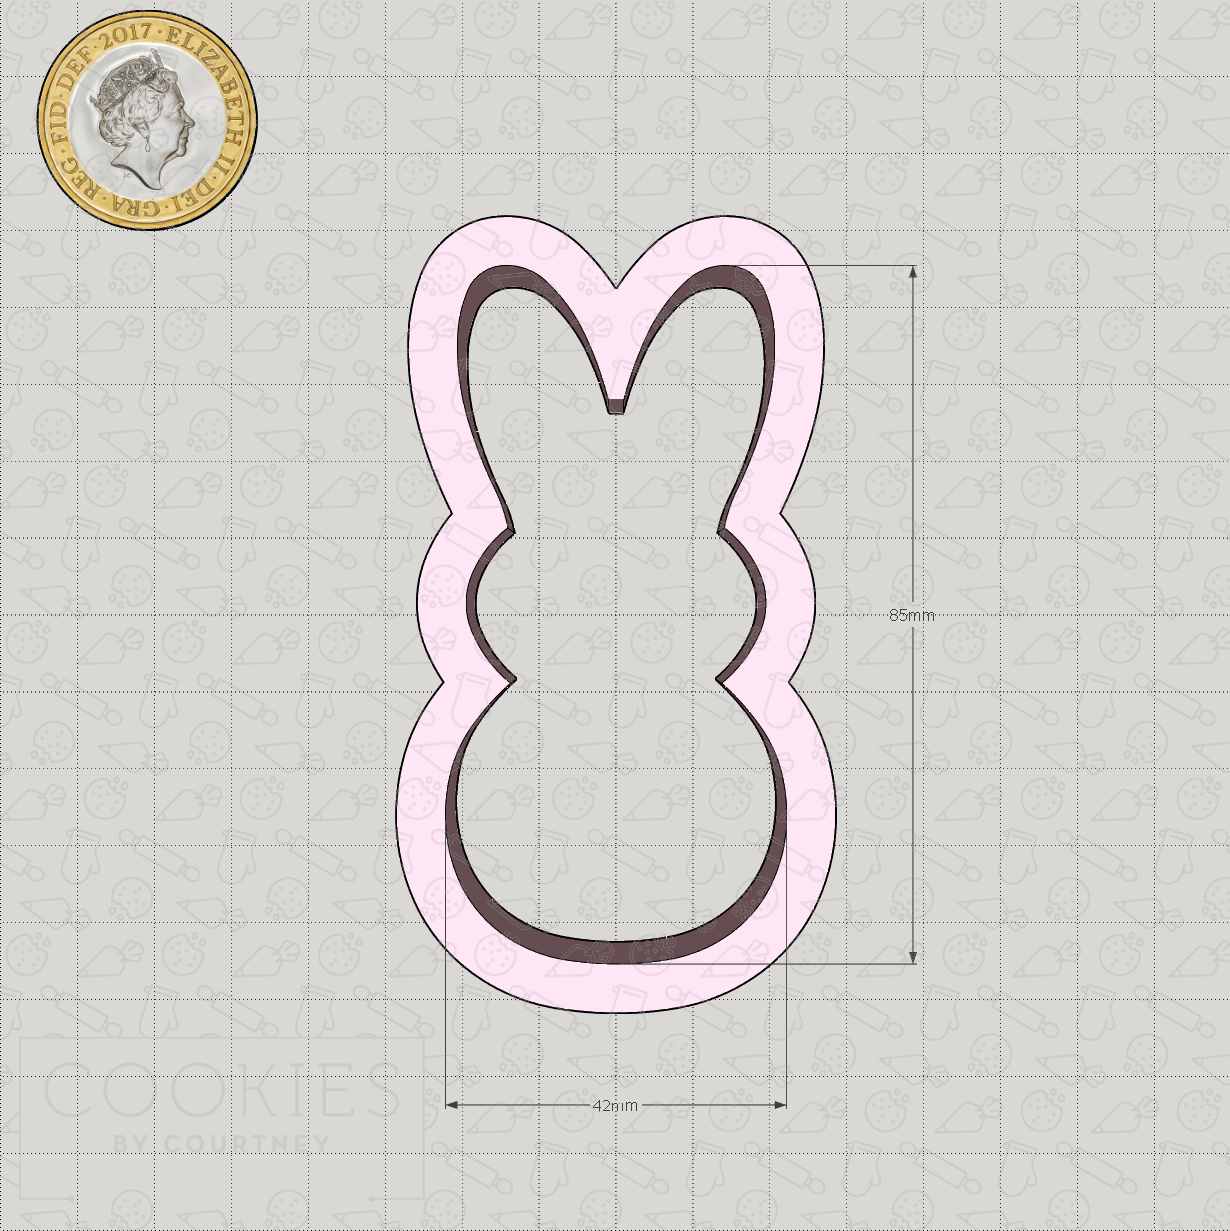 Marshmallow Bunny Cookie Cutter